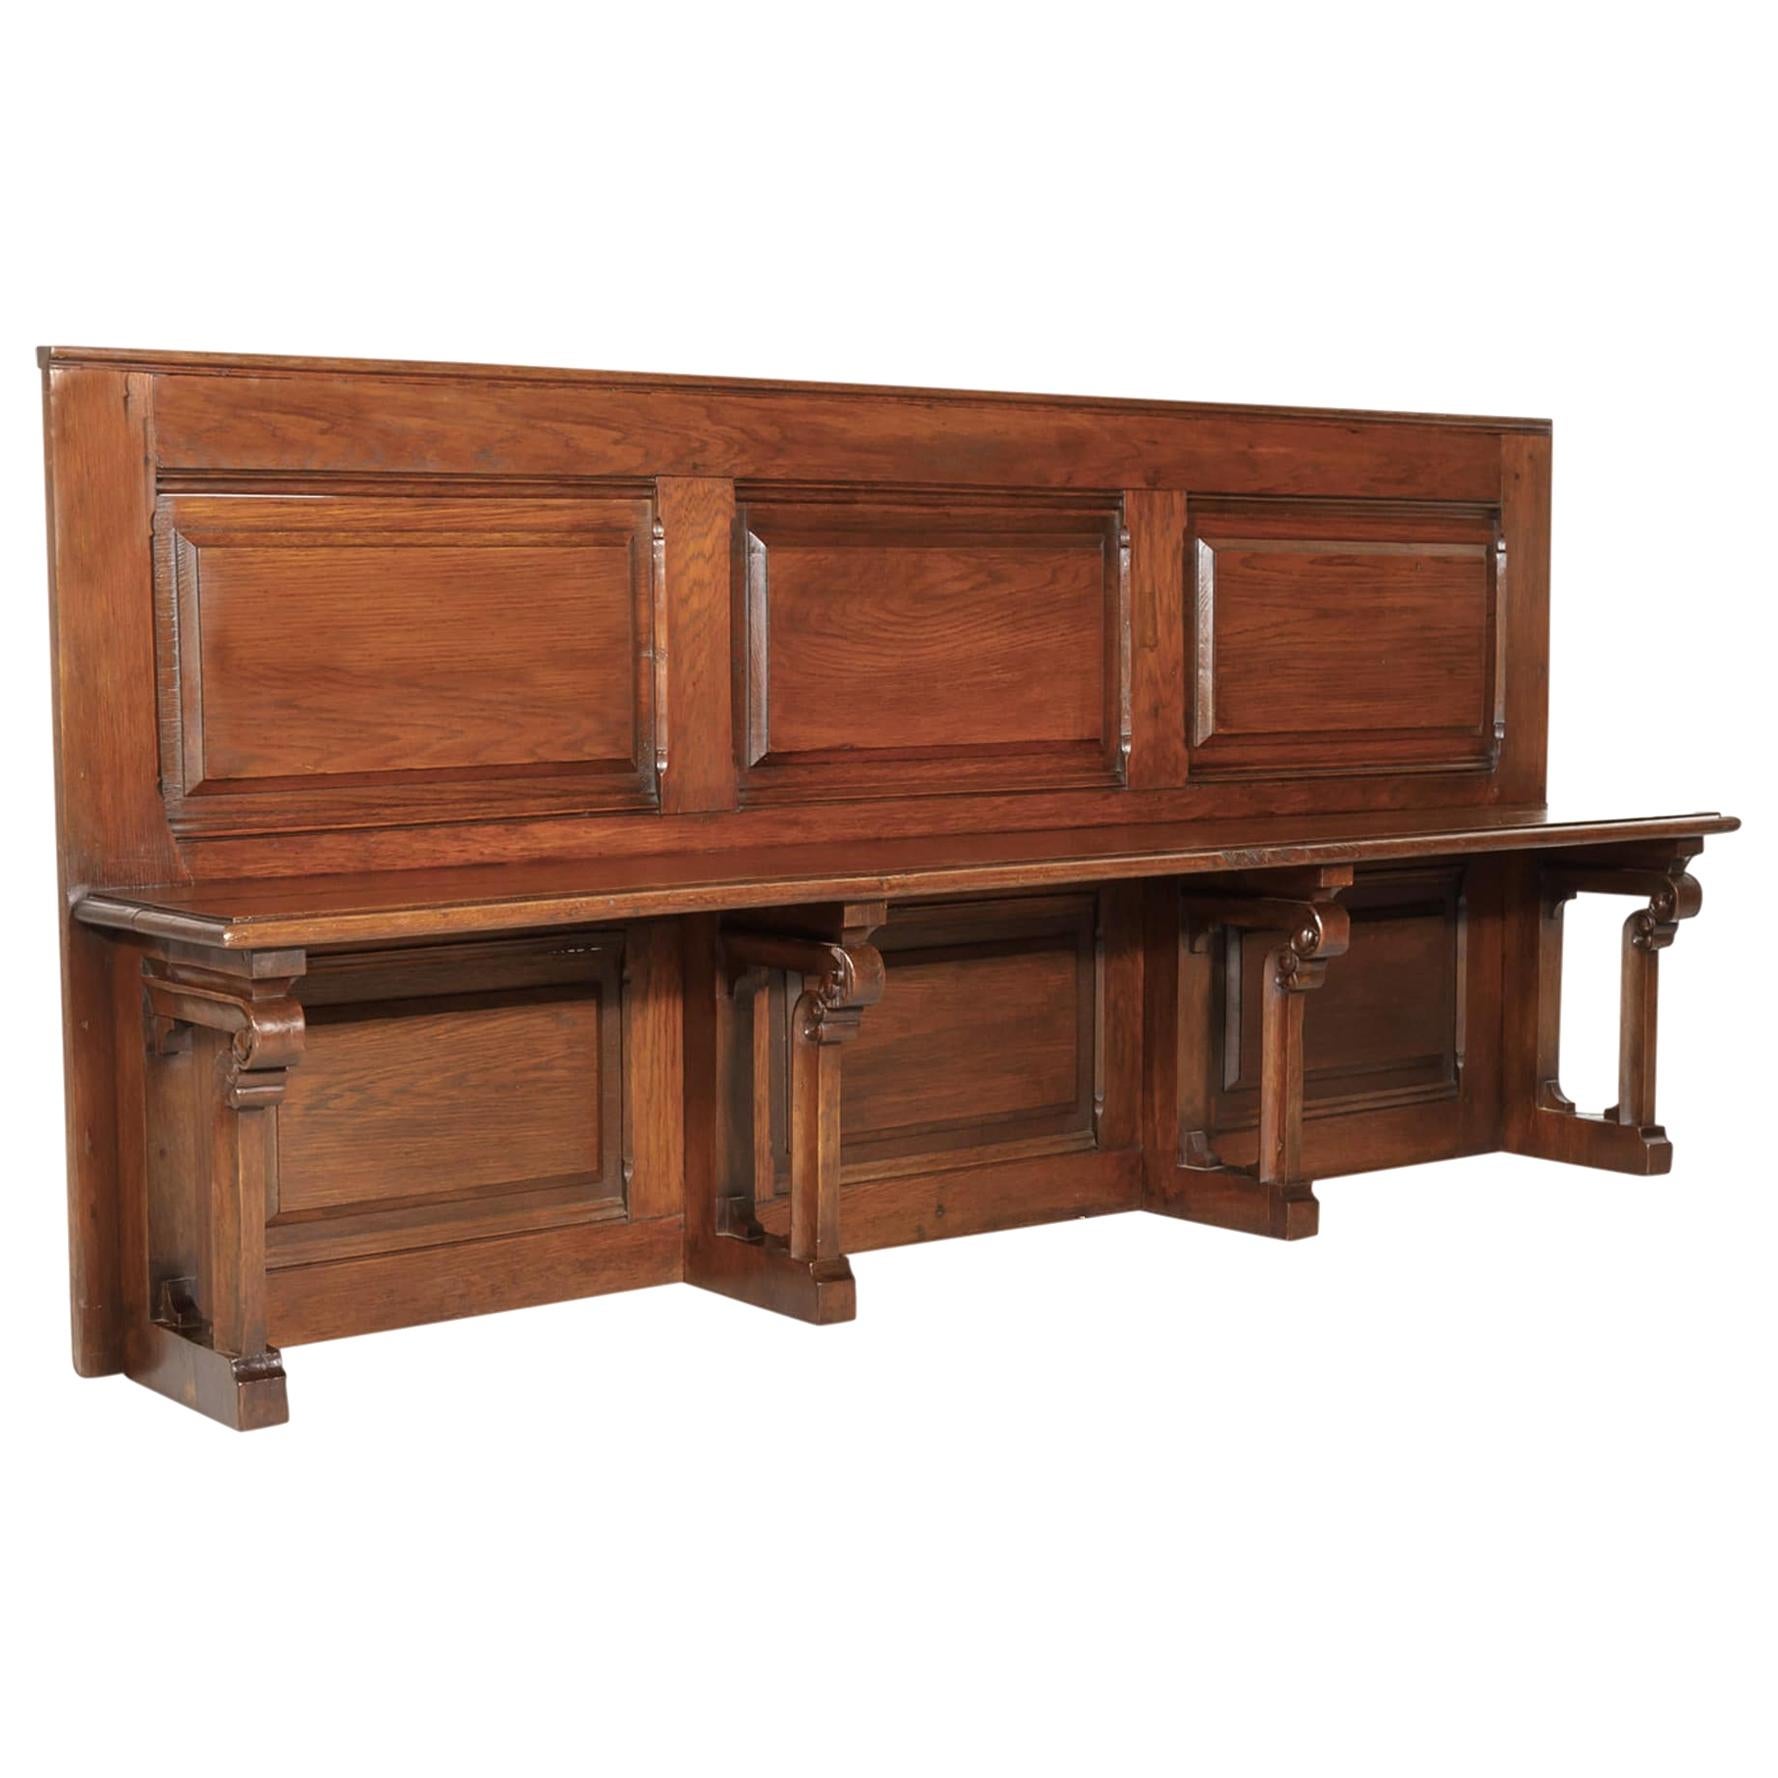 19th Century French Gothic Revival Period Church Pew Or Hall Bench